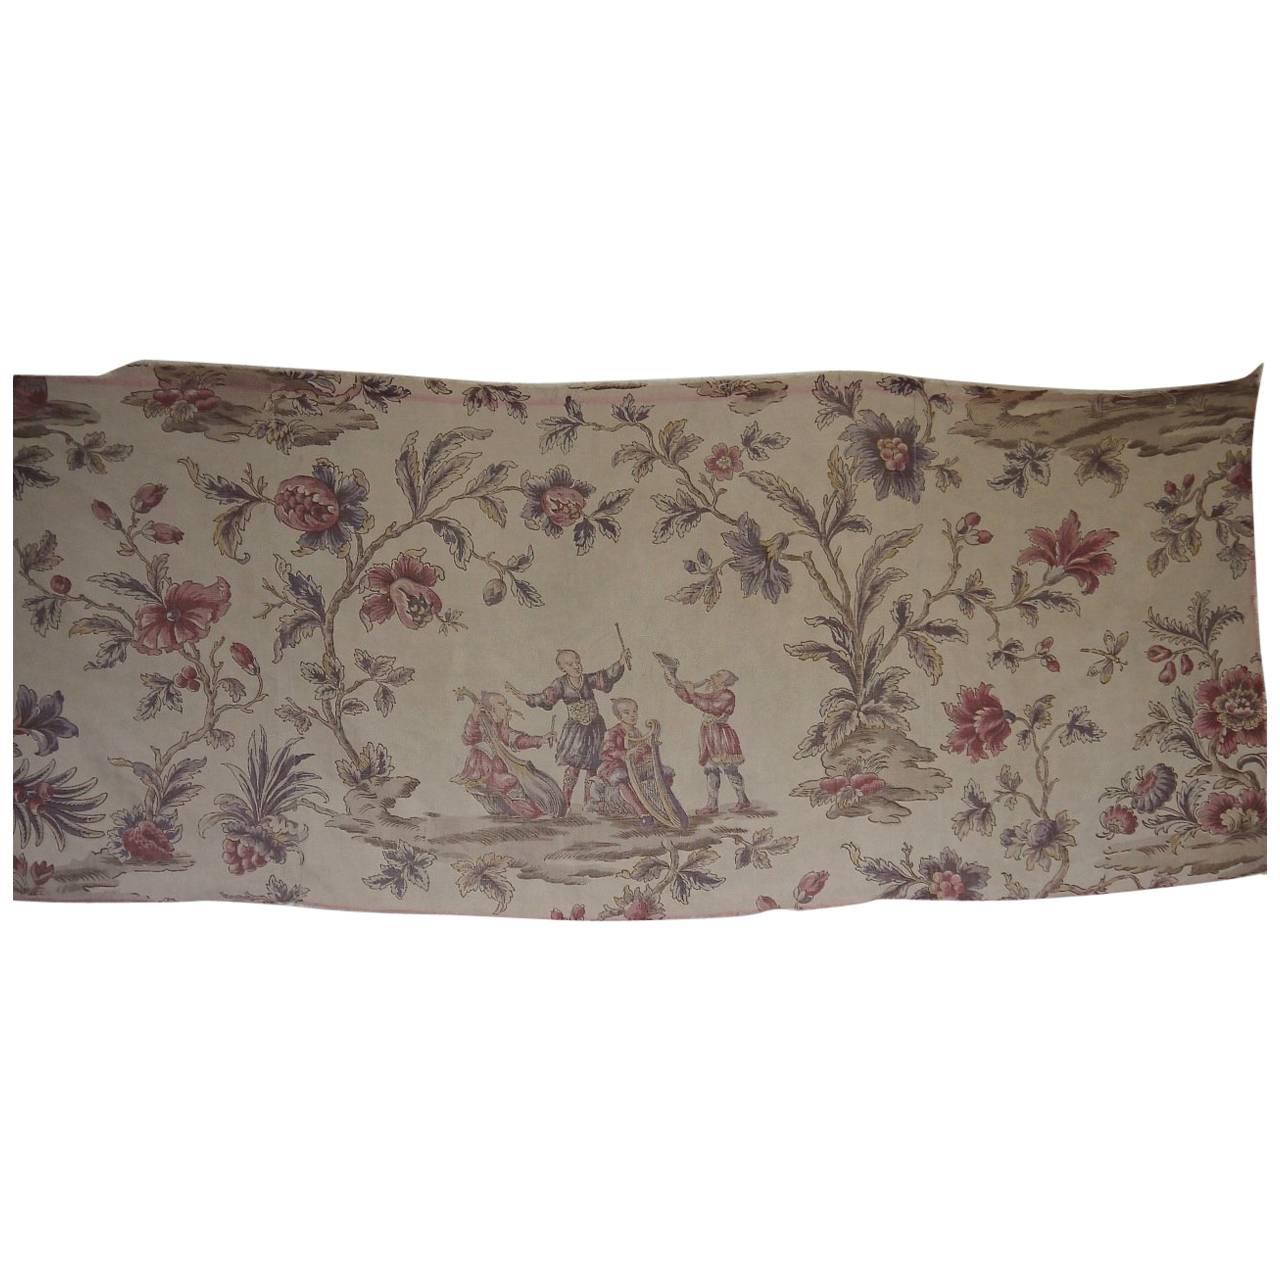 Late 19th Century Antique French Chinoiserie Printed Linen Panel